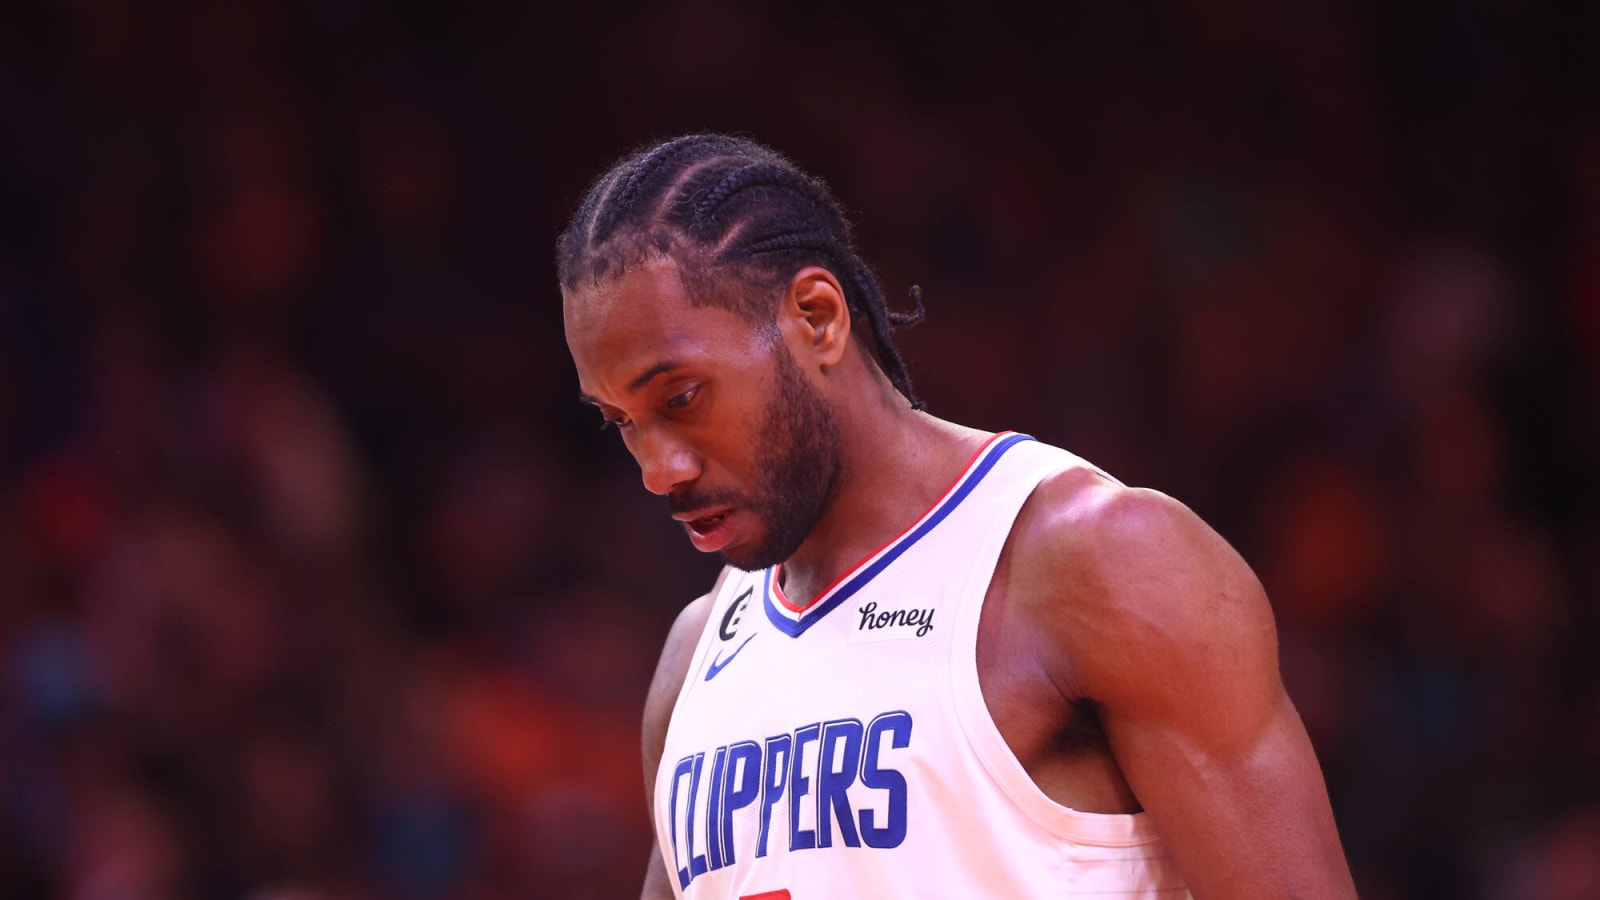 Sources: Spurs star Kawhi Leonard expected to miss remainder of